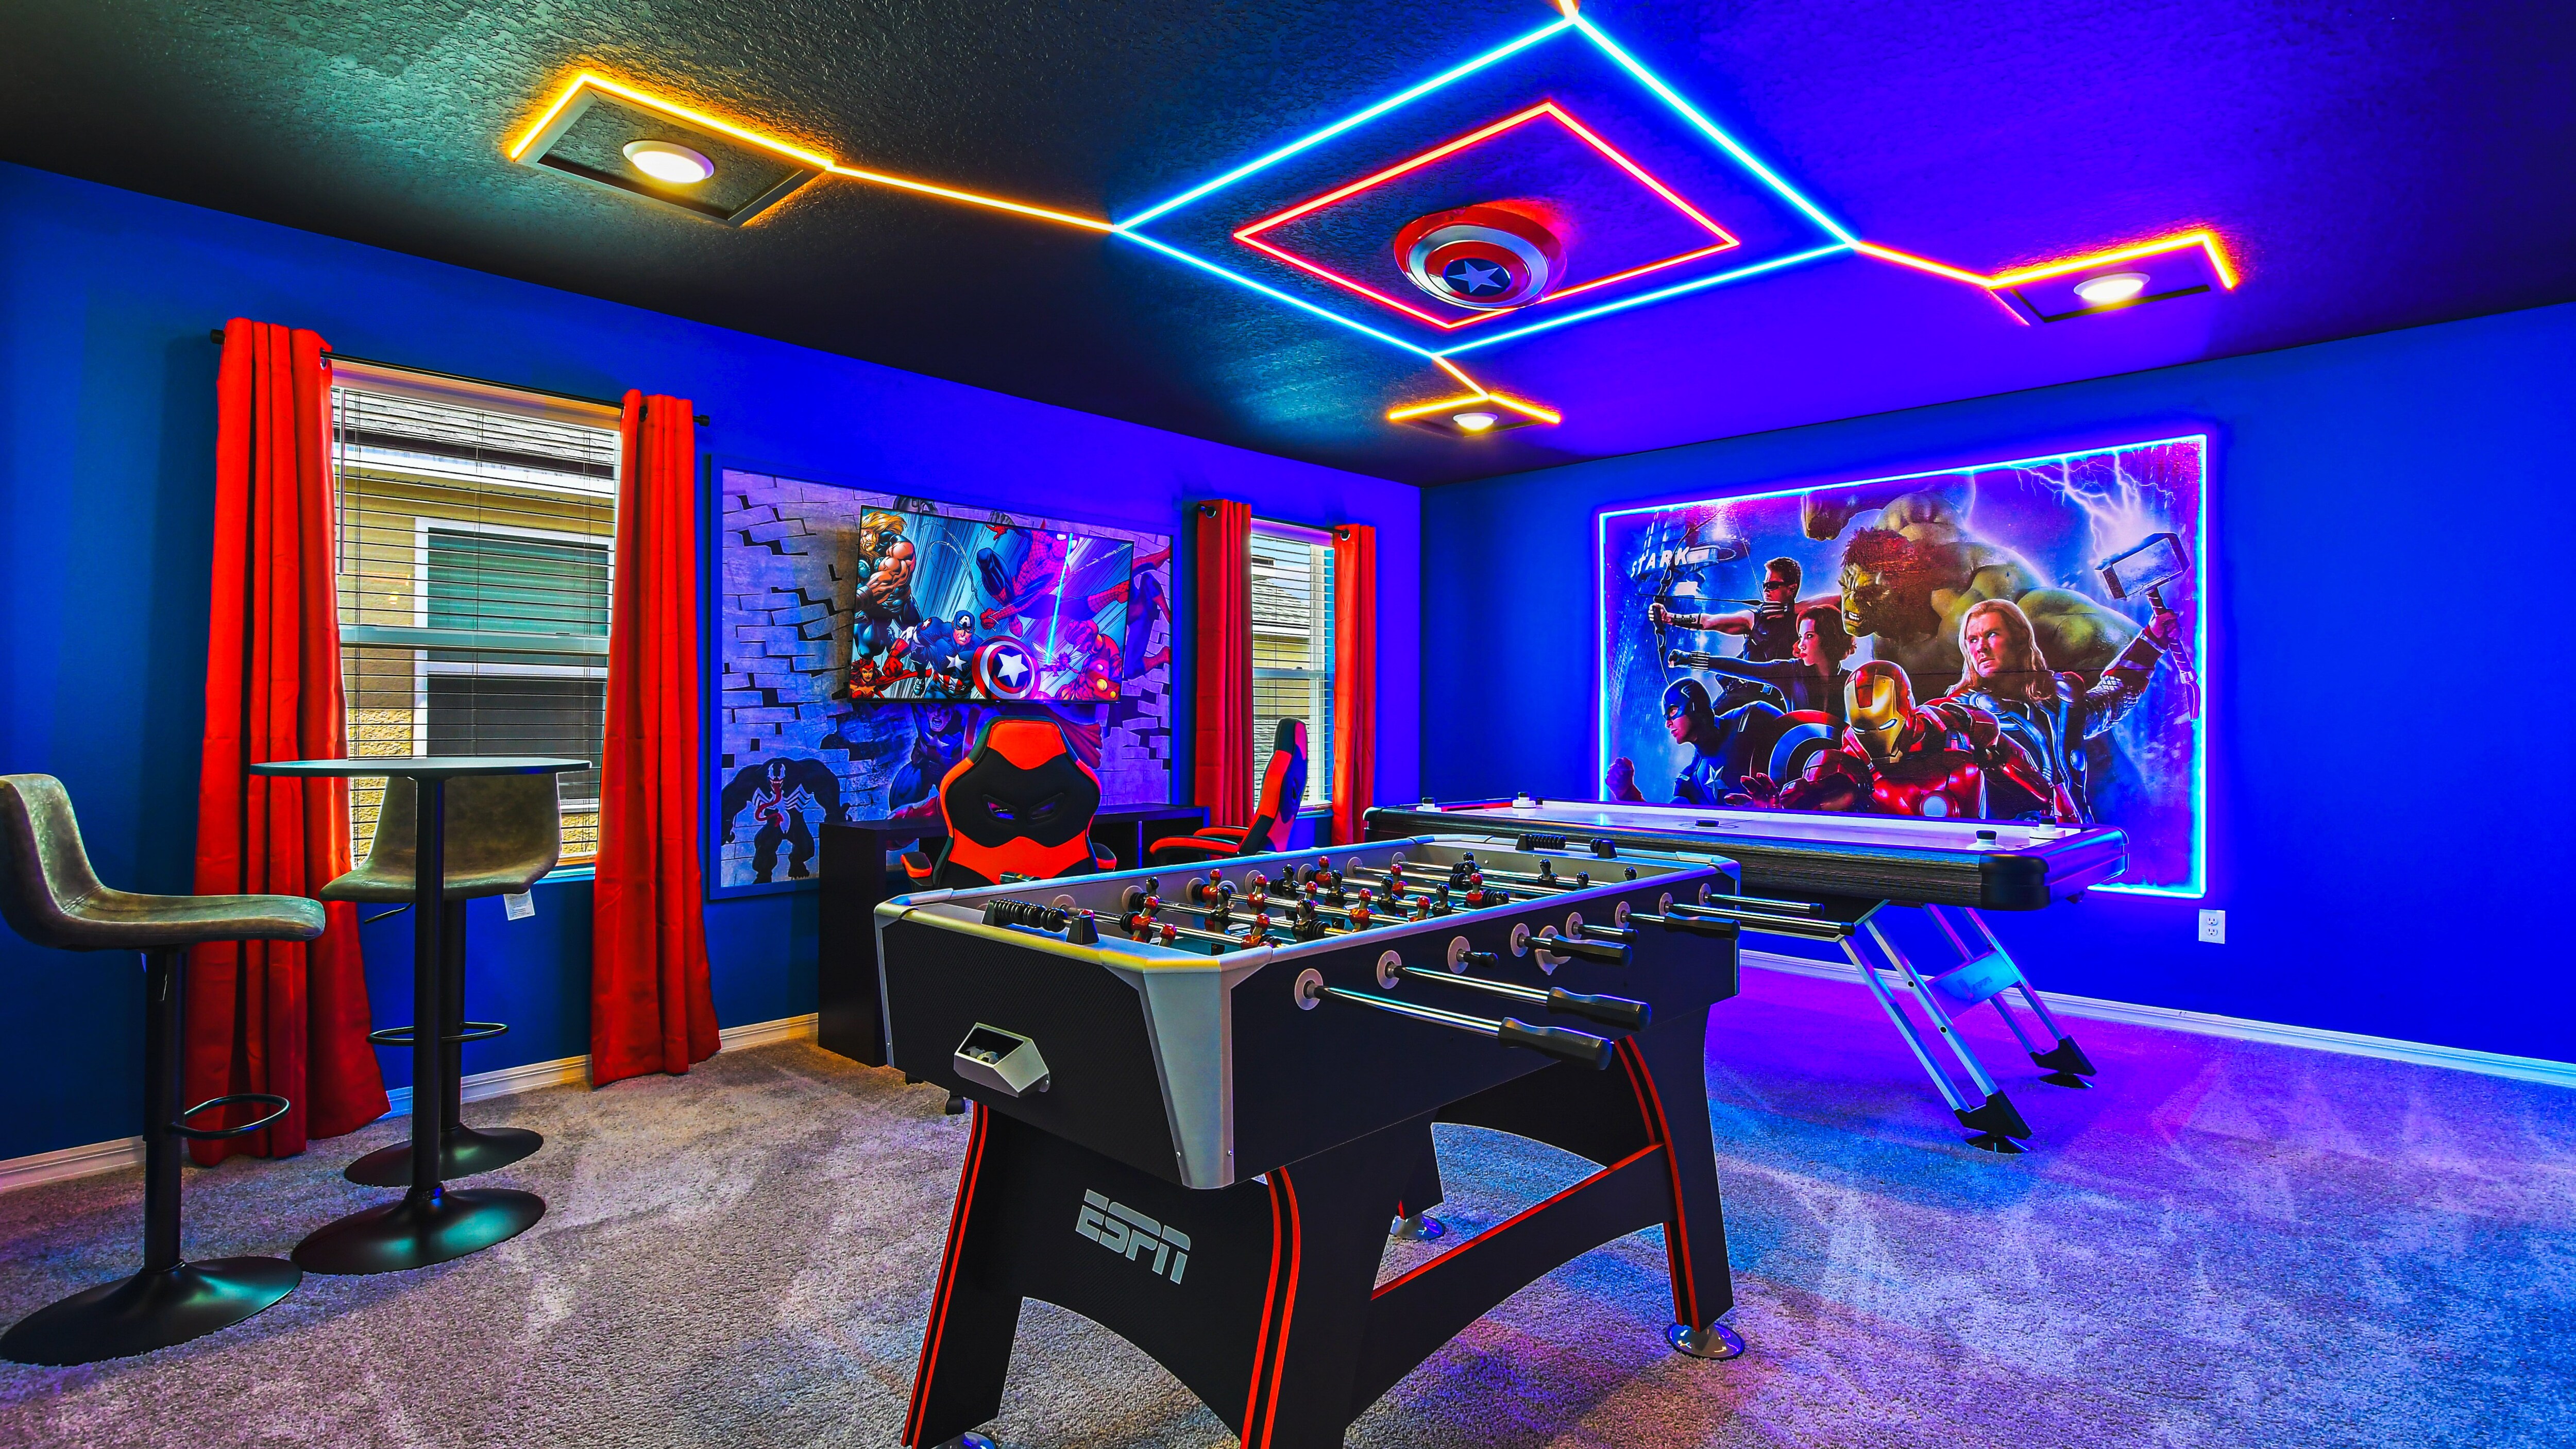 The game loft is stylishly furnished with Avengers theme with cool lights